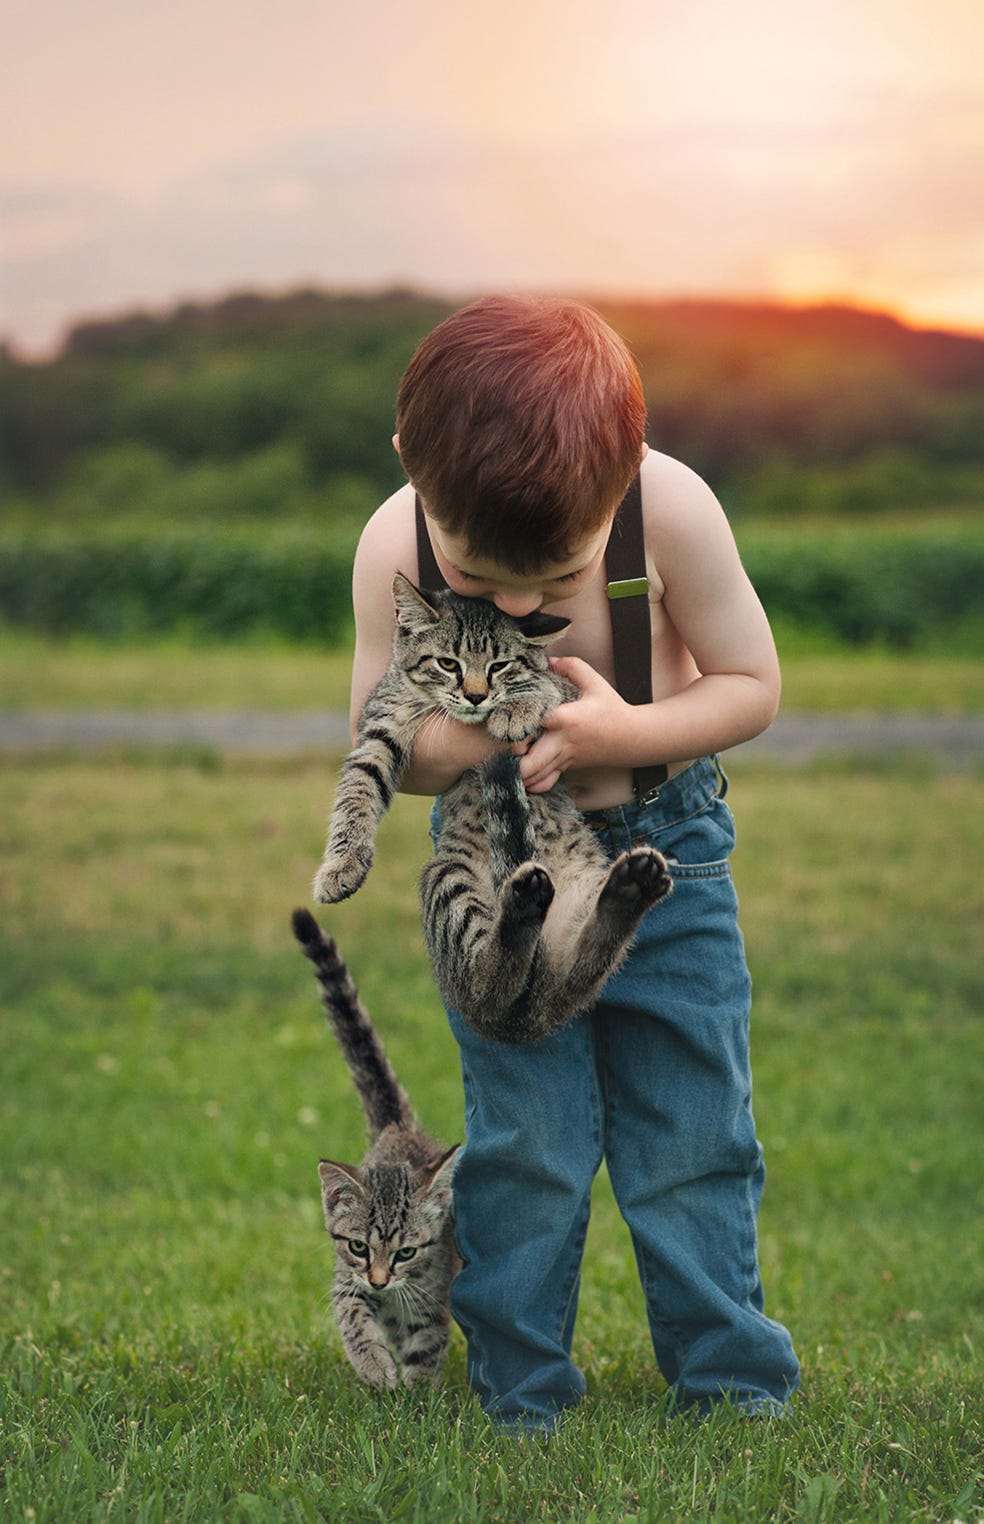 27 Photos That Celebrate the Powerful Bond Between Children and Animals ...